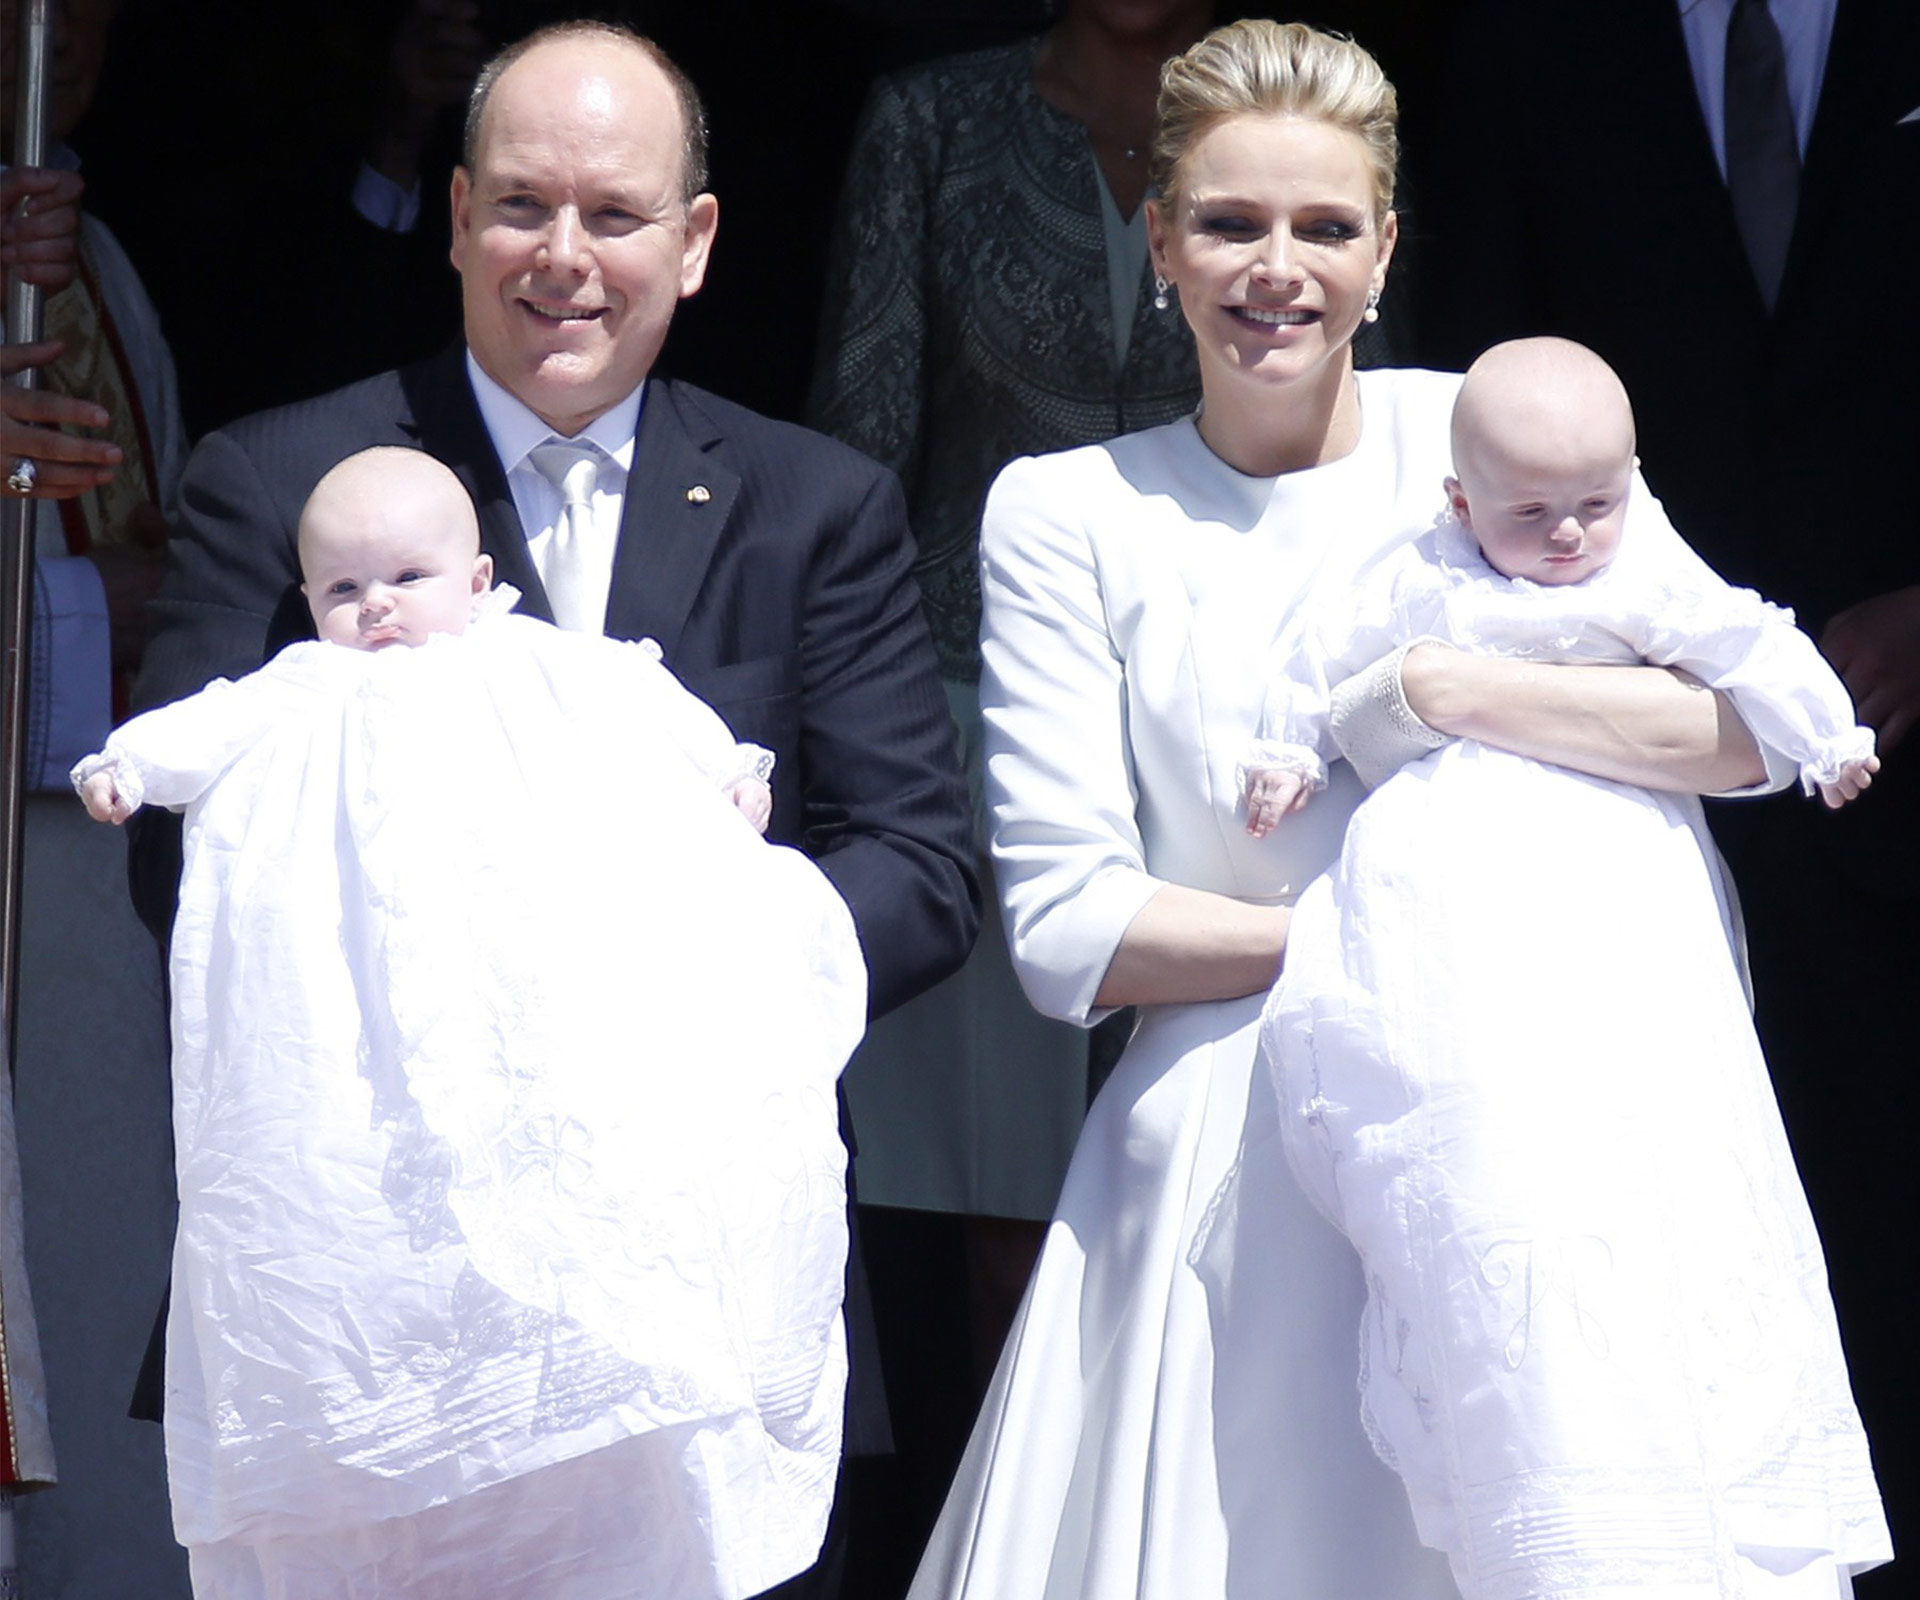 Princess Charlene of Monaco is radiant at her twins’ christening